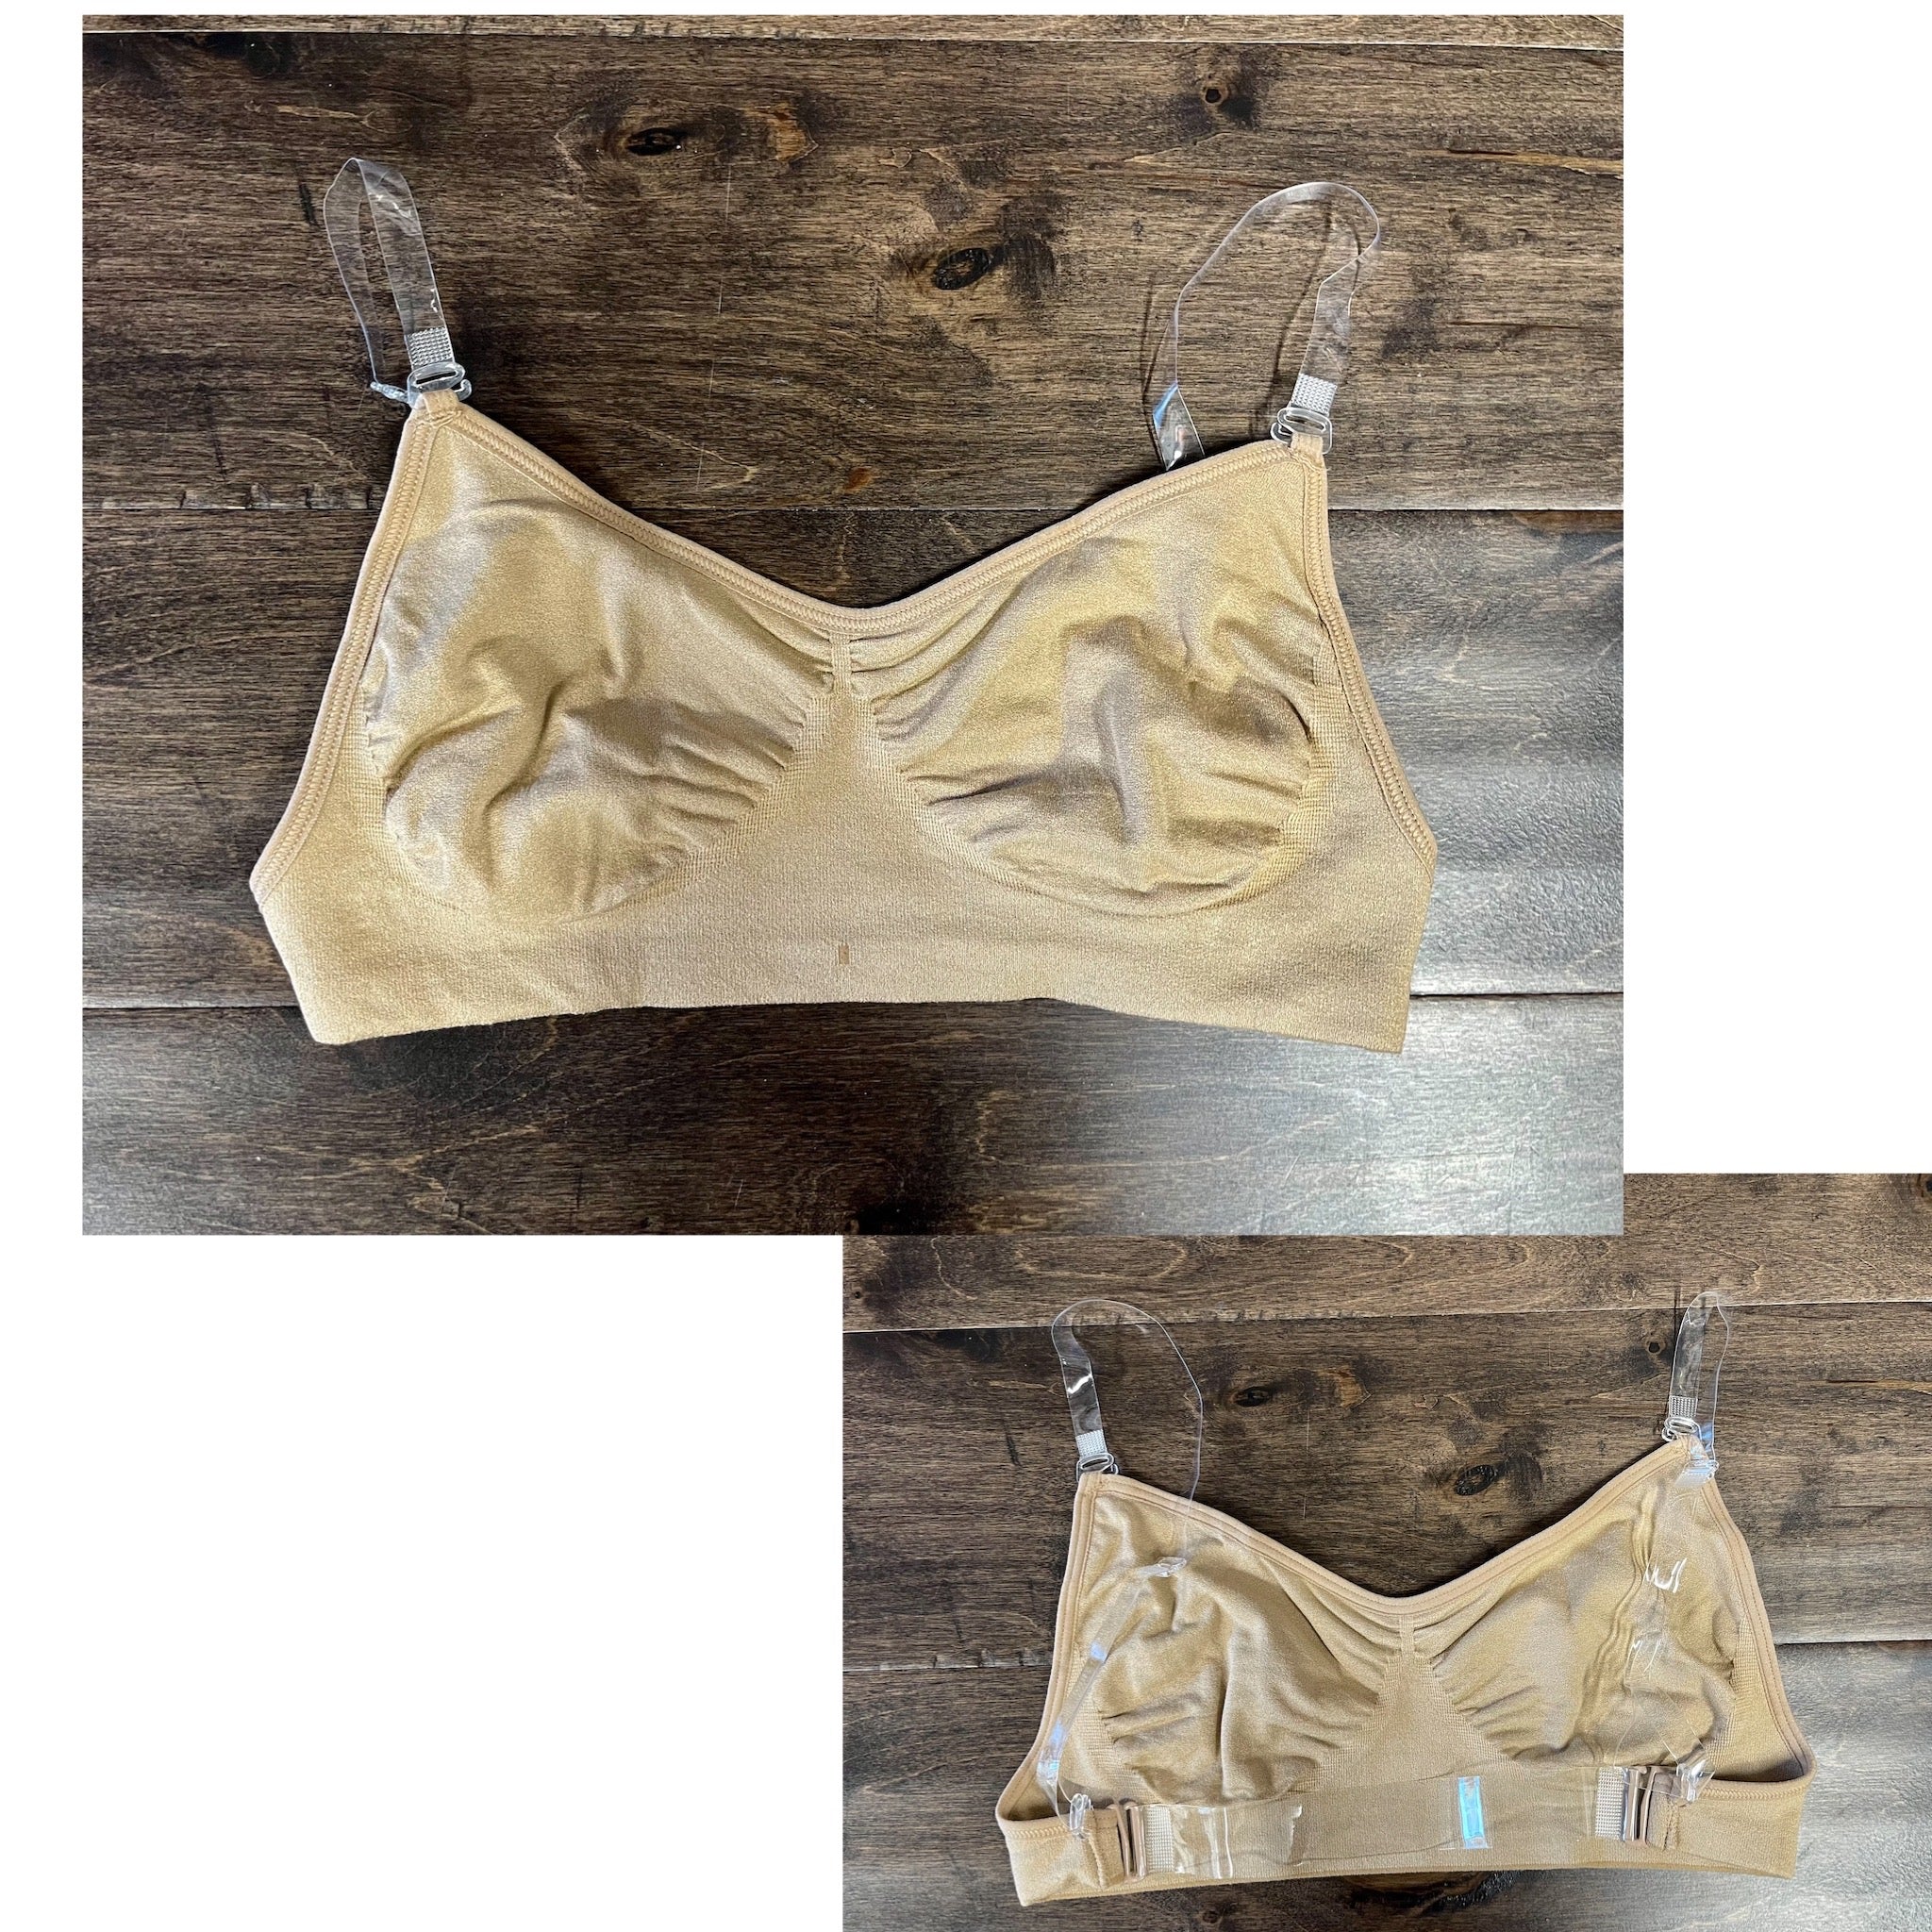 Nude Seamless Bra with Clear or Nude Straps! – Tightspot Dancewear